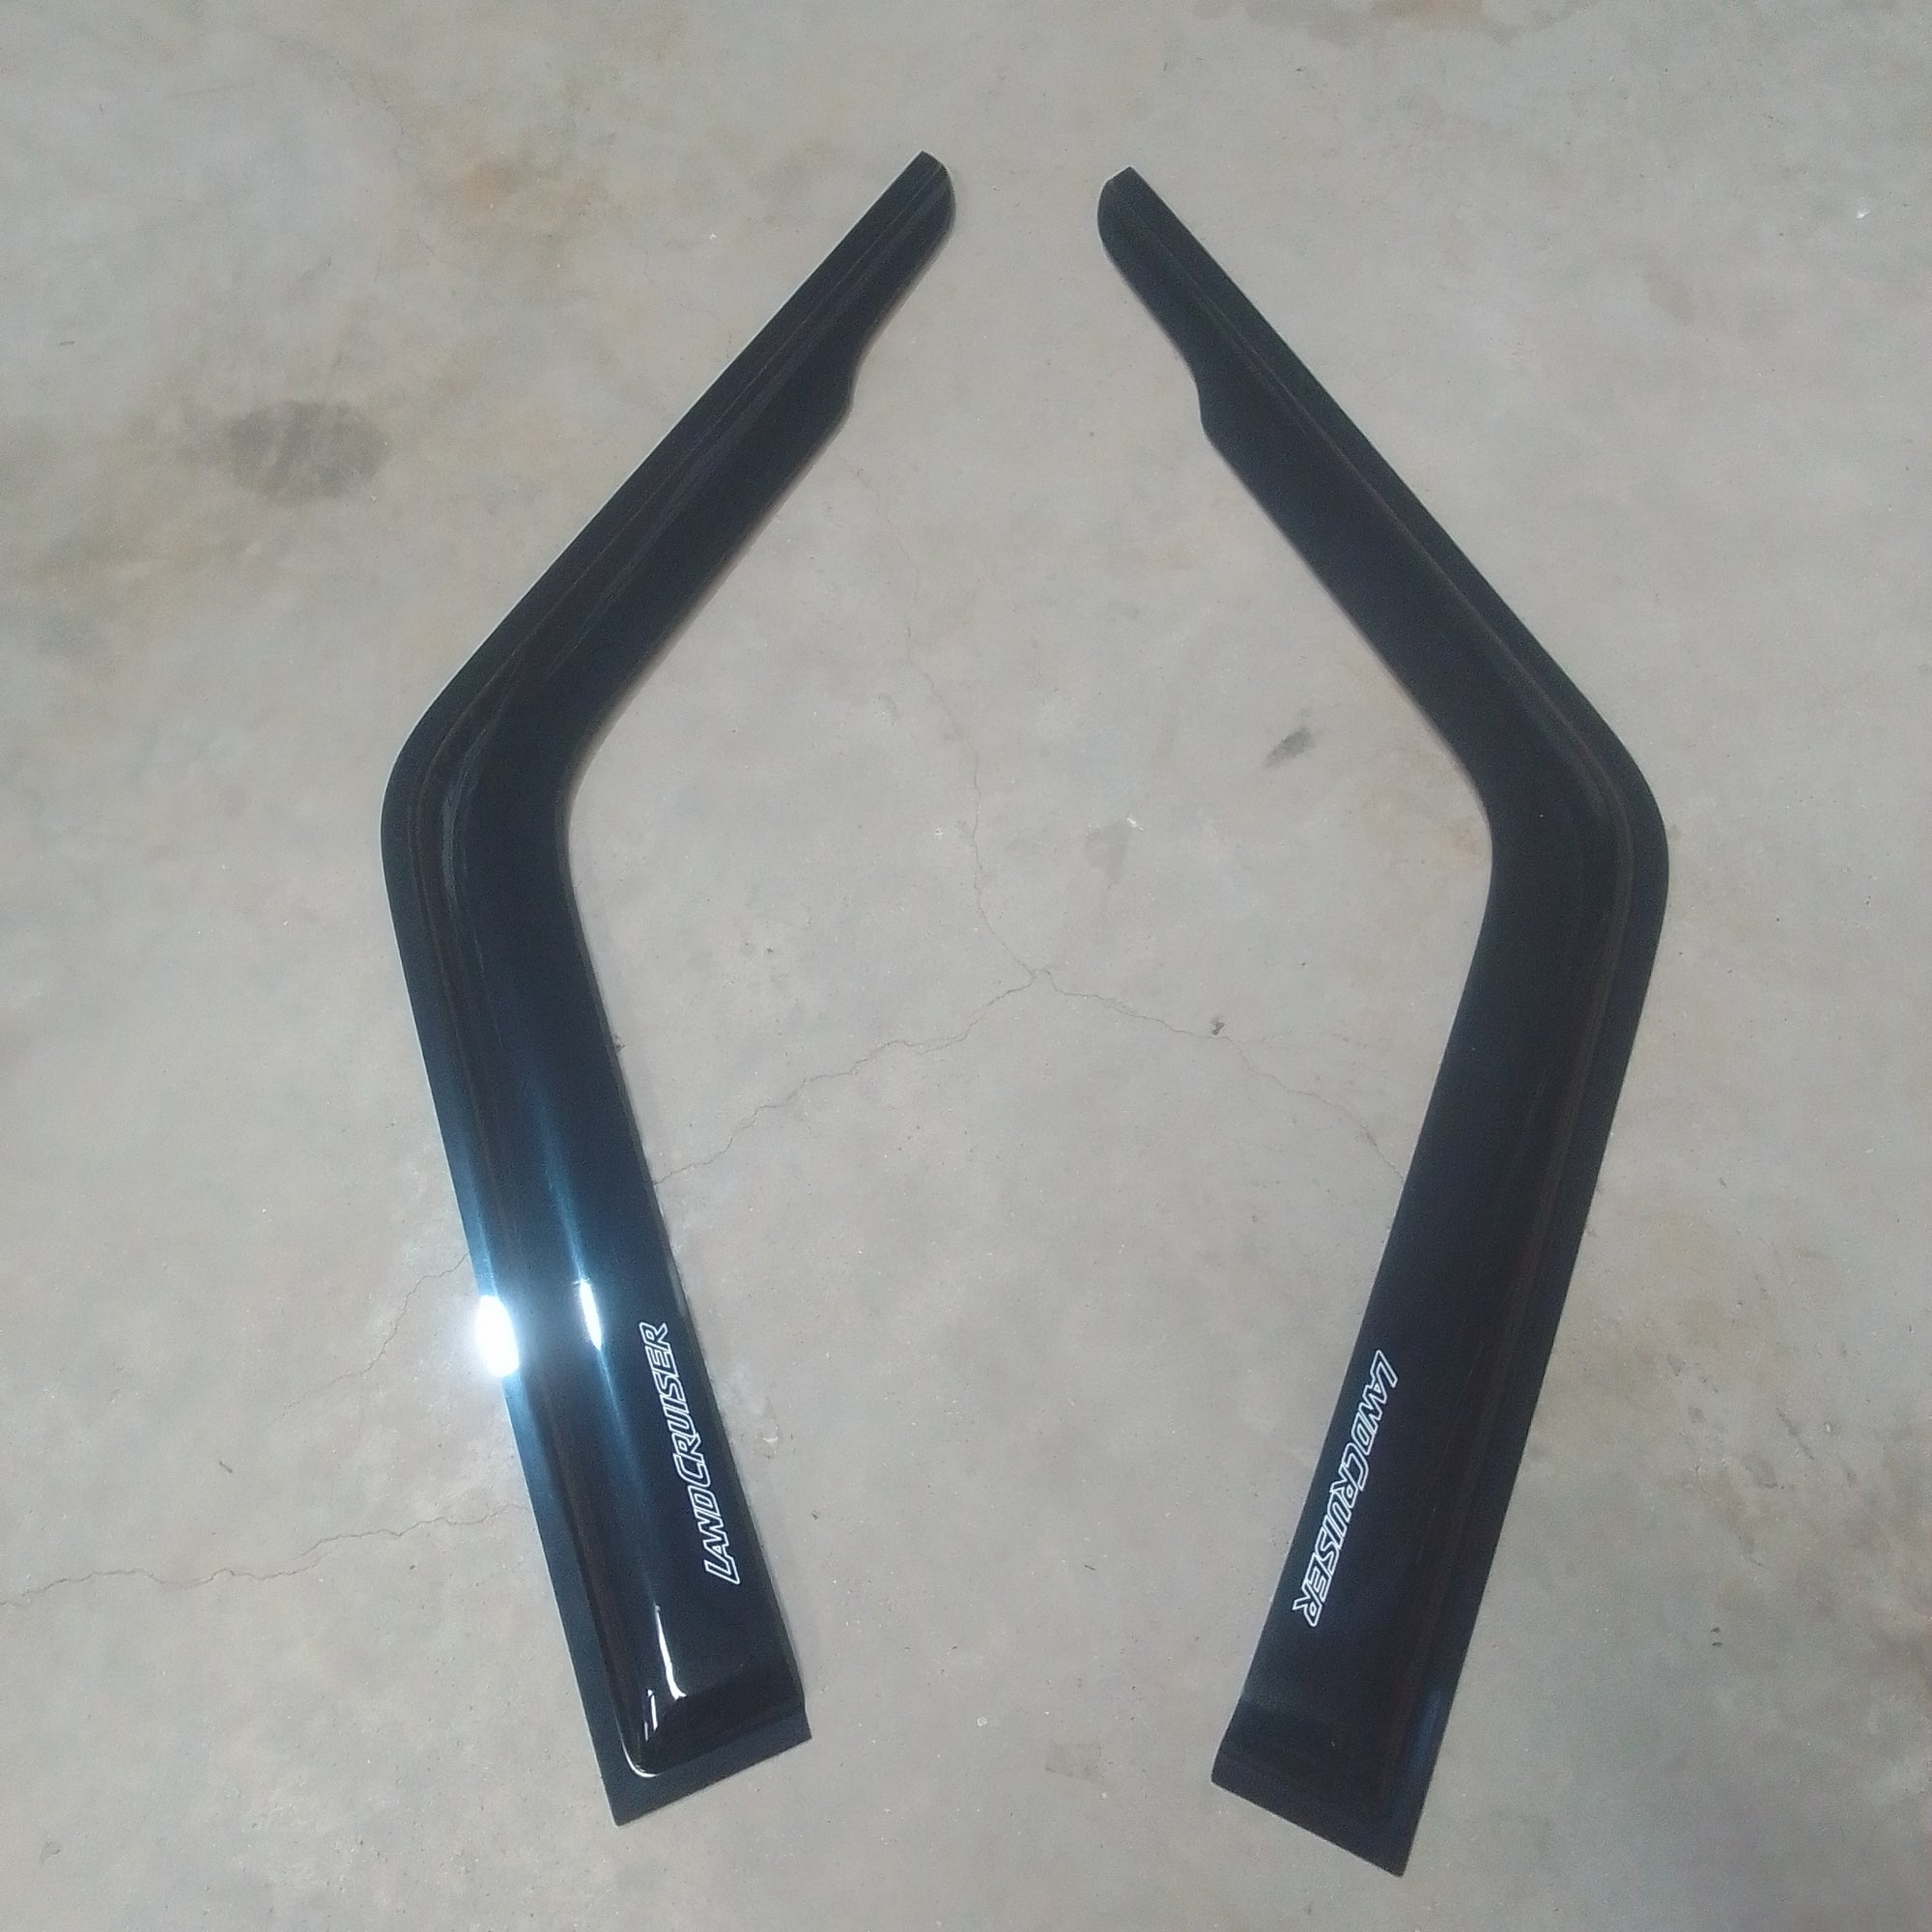 Landcruiser 70 Series Single cab weather guards(gloss black) with logo.